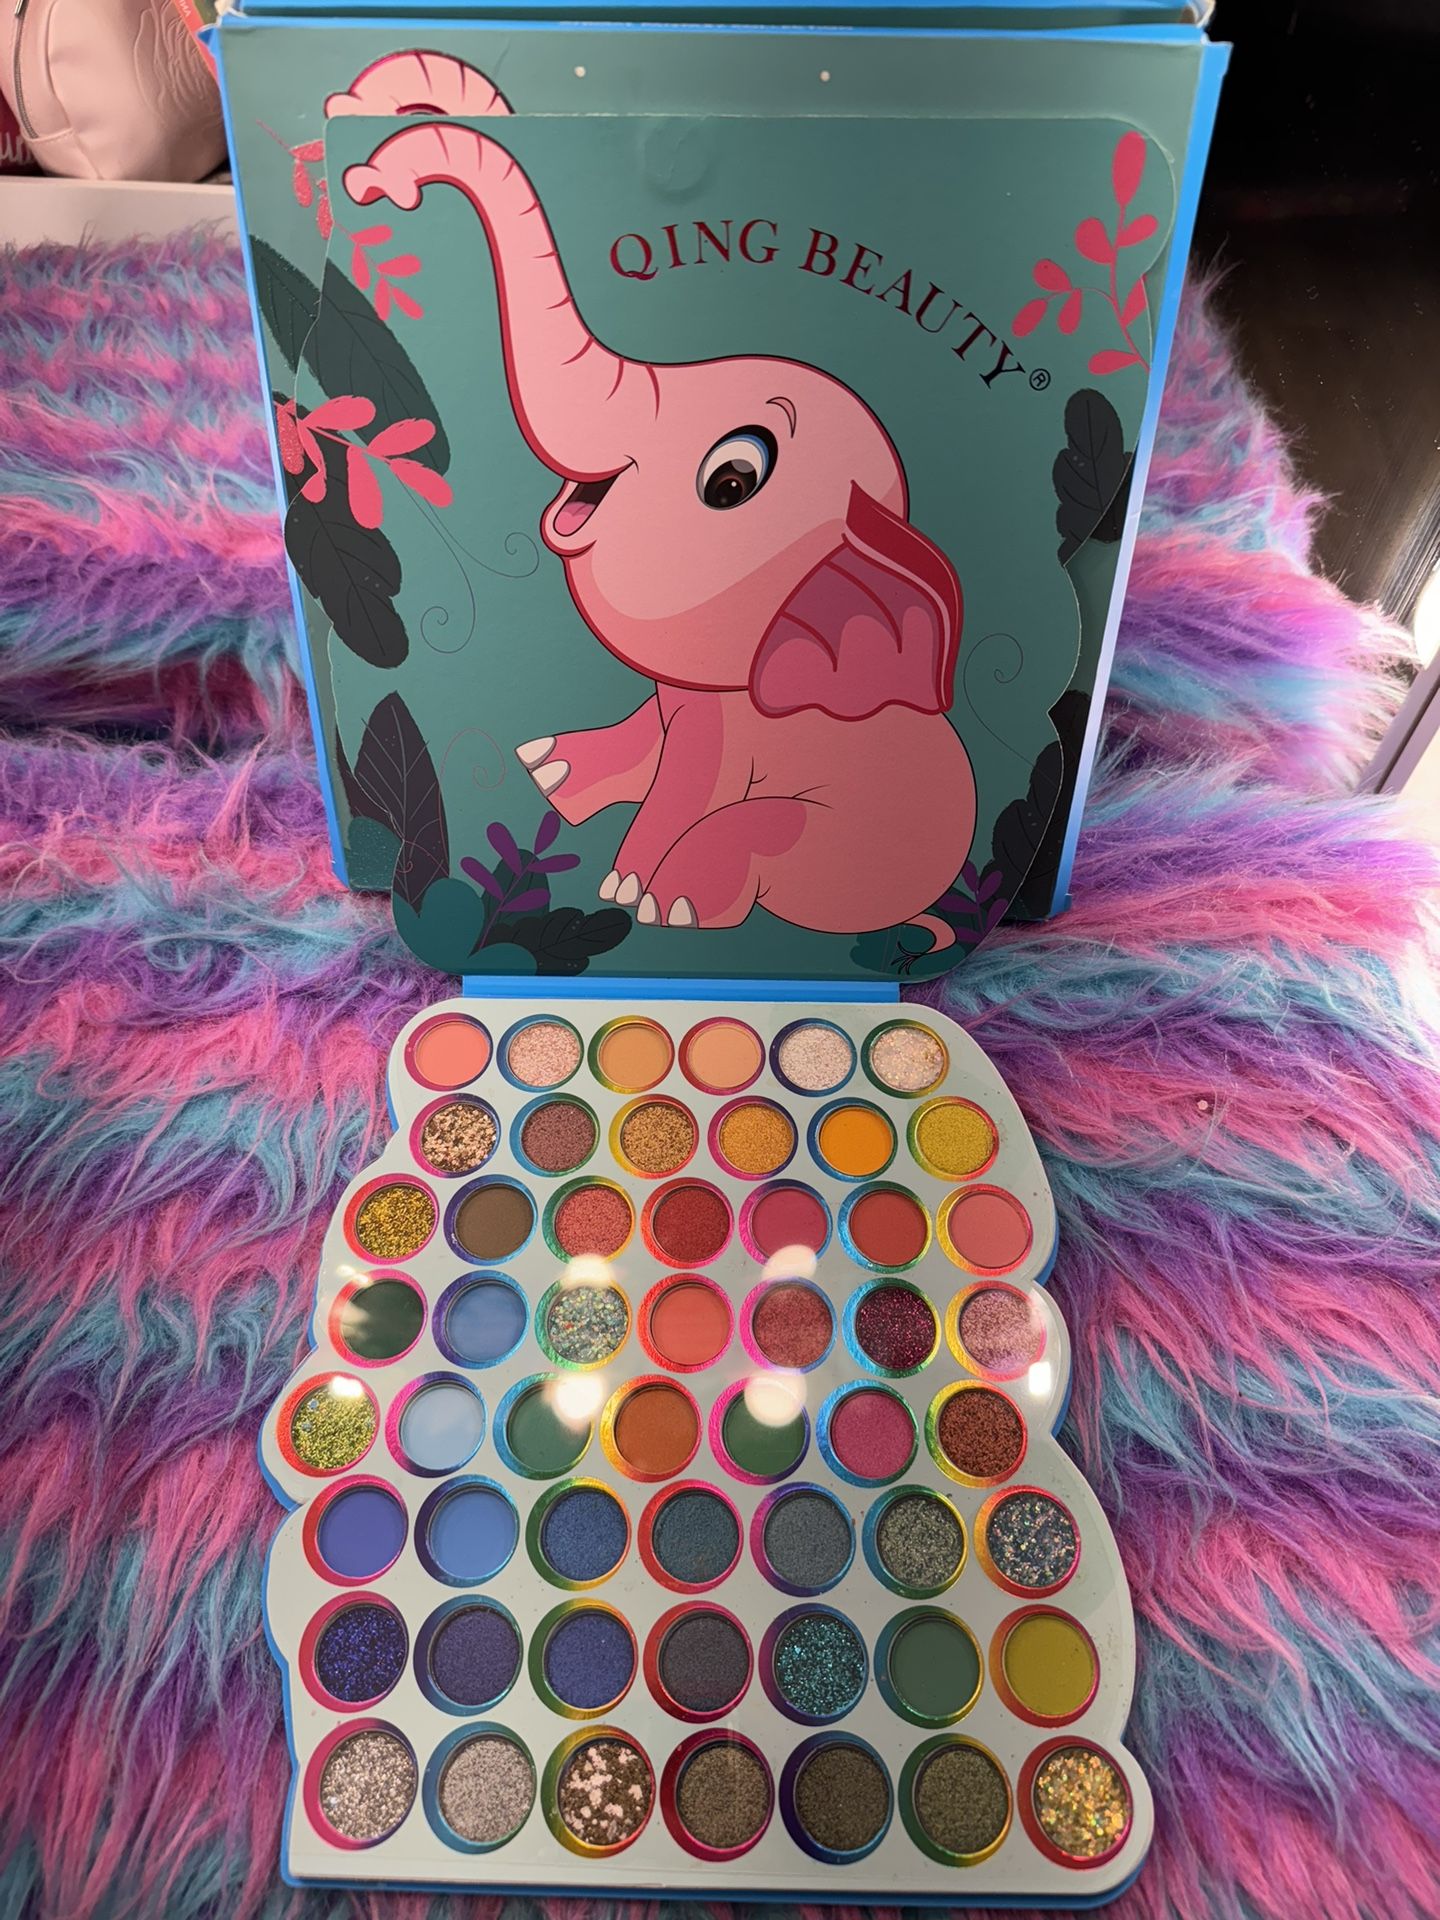 Baby Pink Elephant 🐘 Cute Eyeshadow Palette 🎨 With Beautiful Glitter ✨ Eyeshadow Colors / Bright Colors 💞